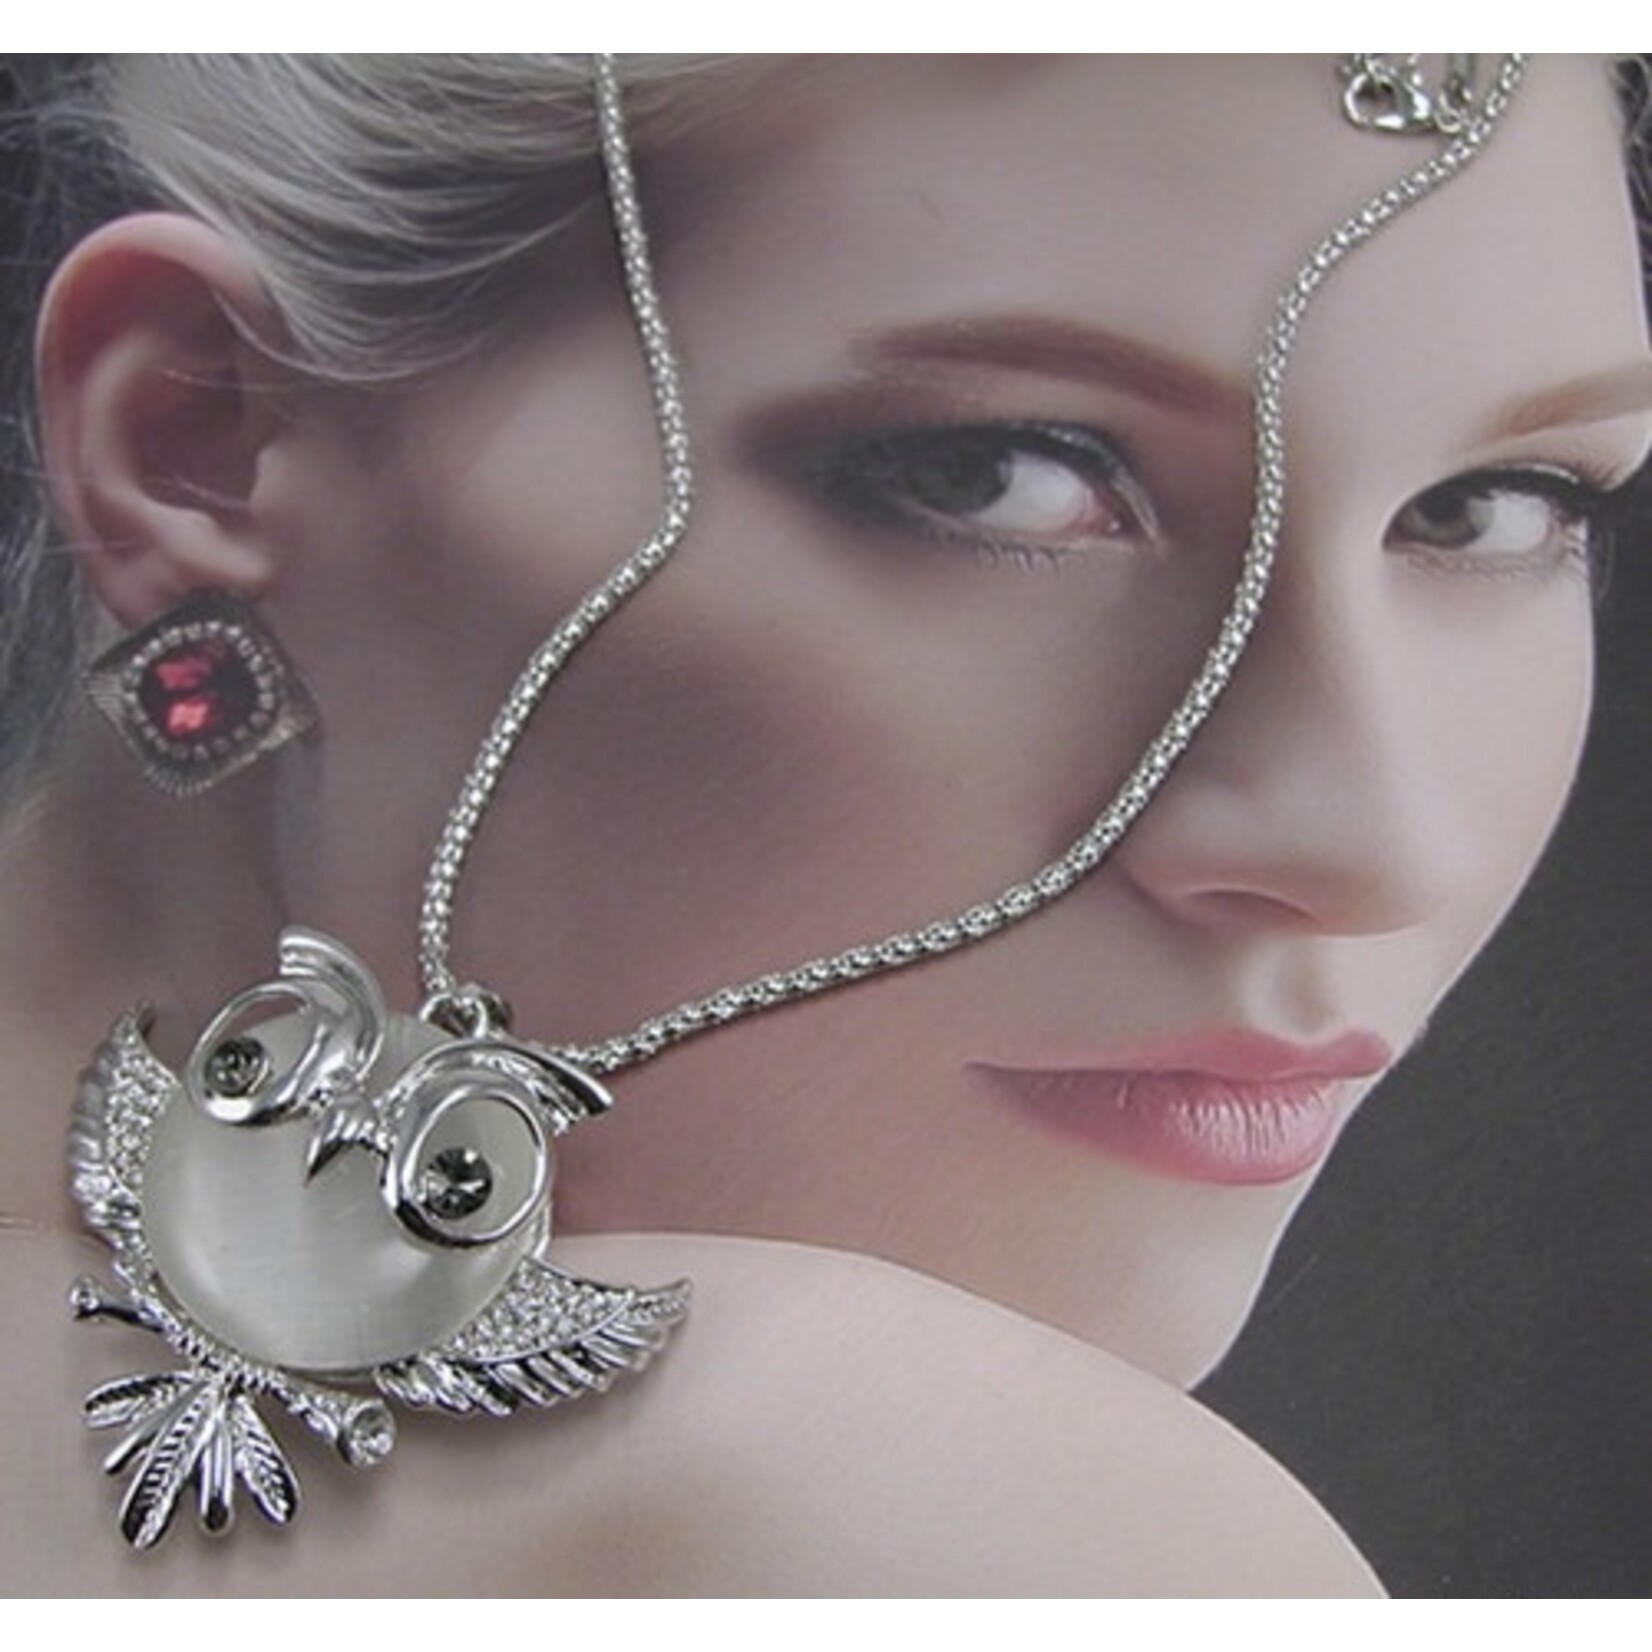 fashion jewelry Fashion jewelry rope chain necklace with owl and clear stone